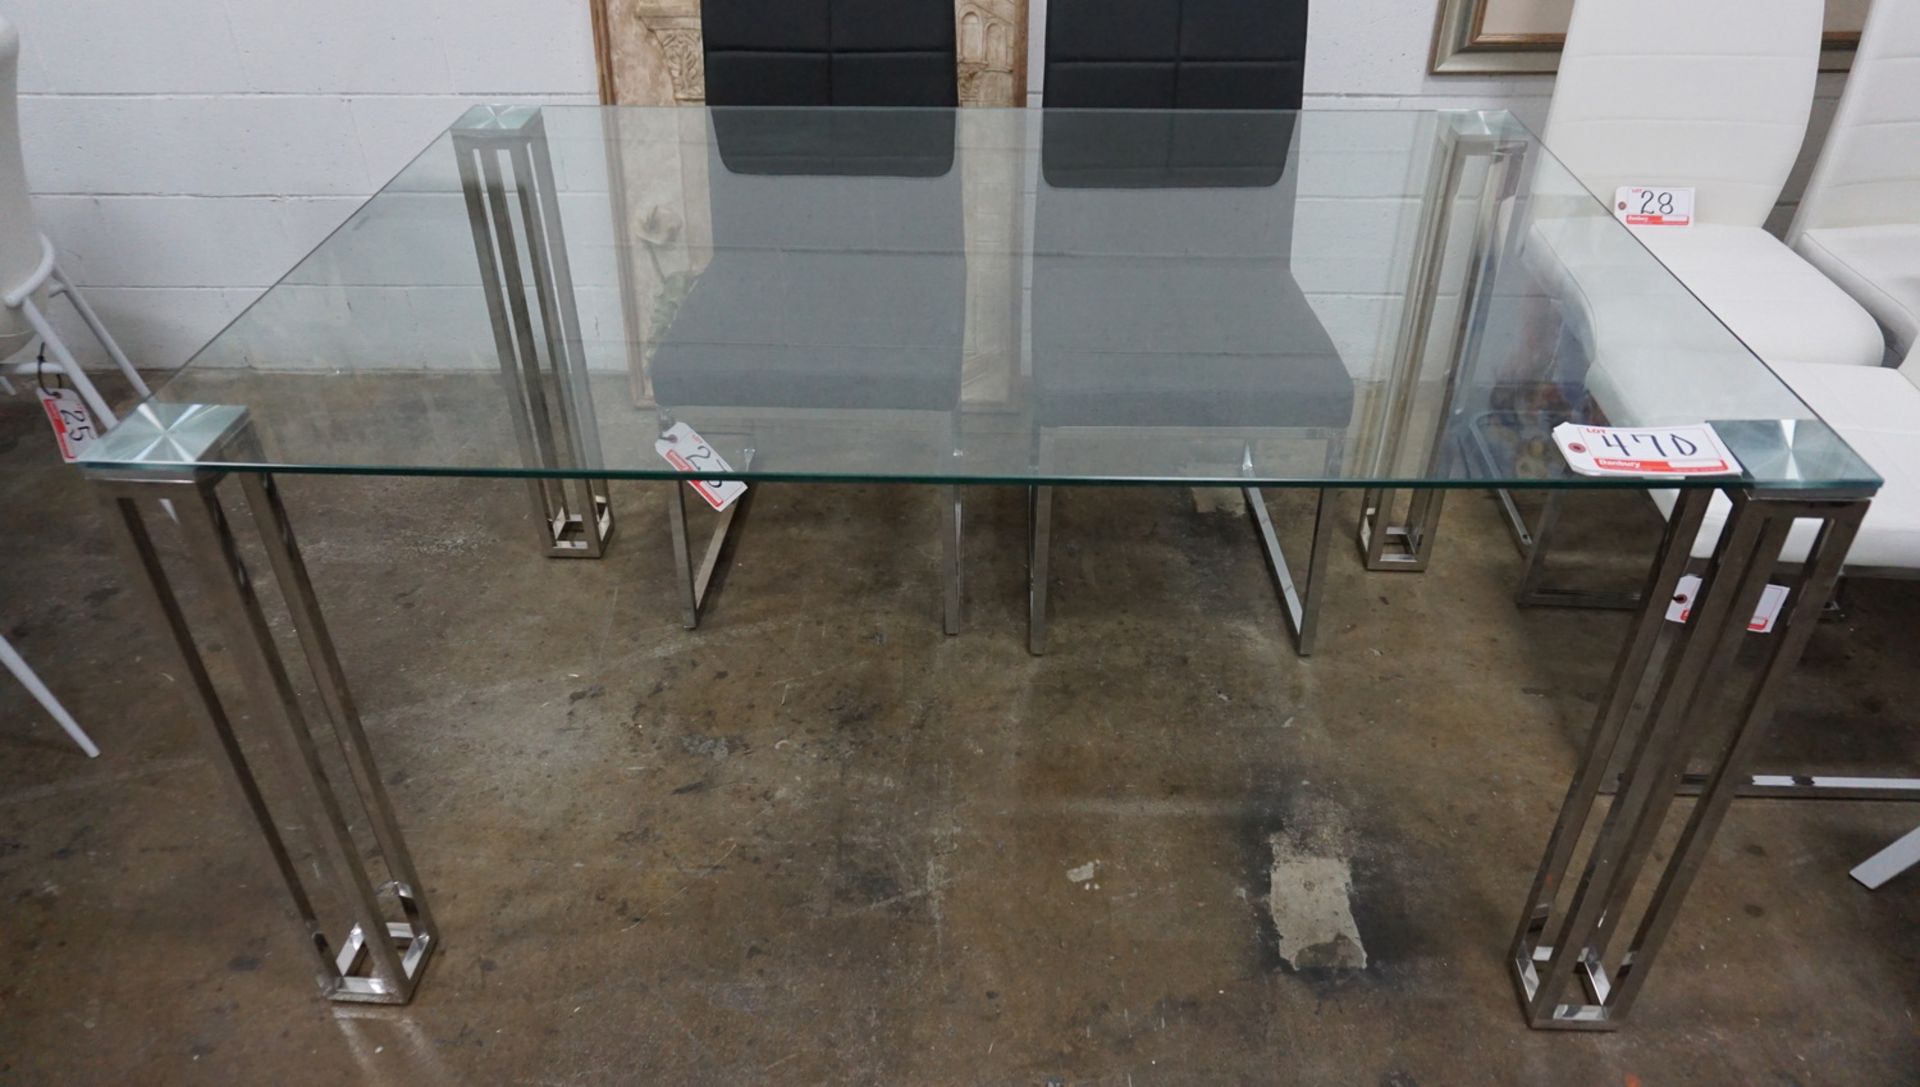 RECTANGLE GLASS DINING TABLE W/ METAL LEGS (60"L X 39"W X 30"H) (100DT) (IN BOX)